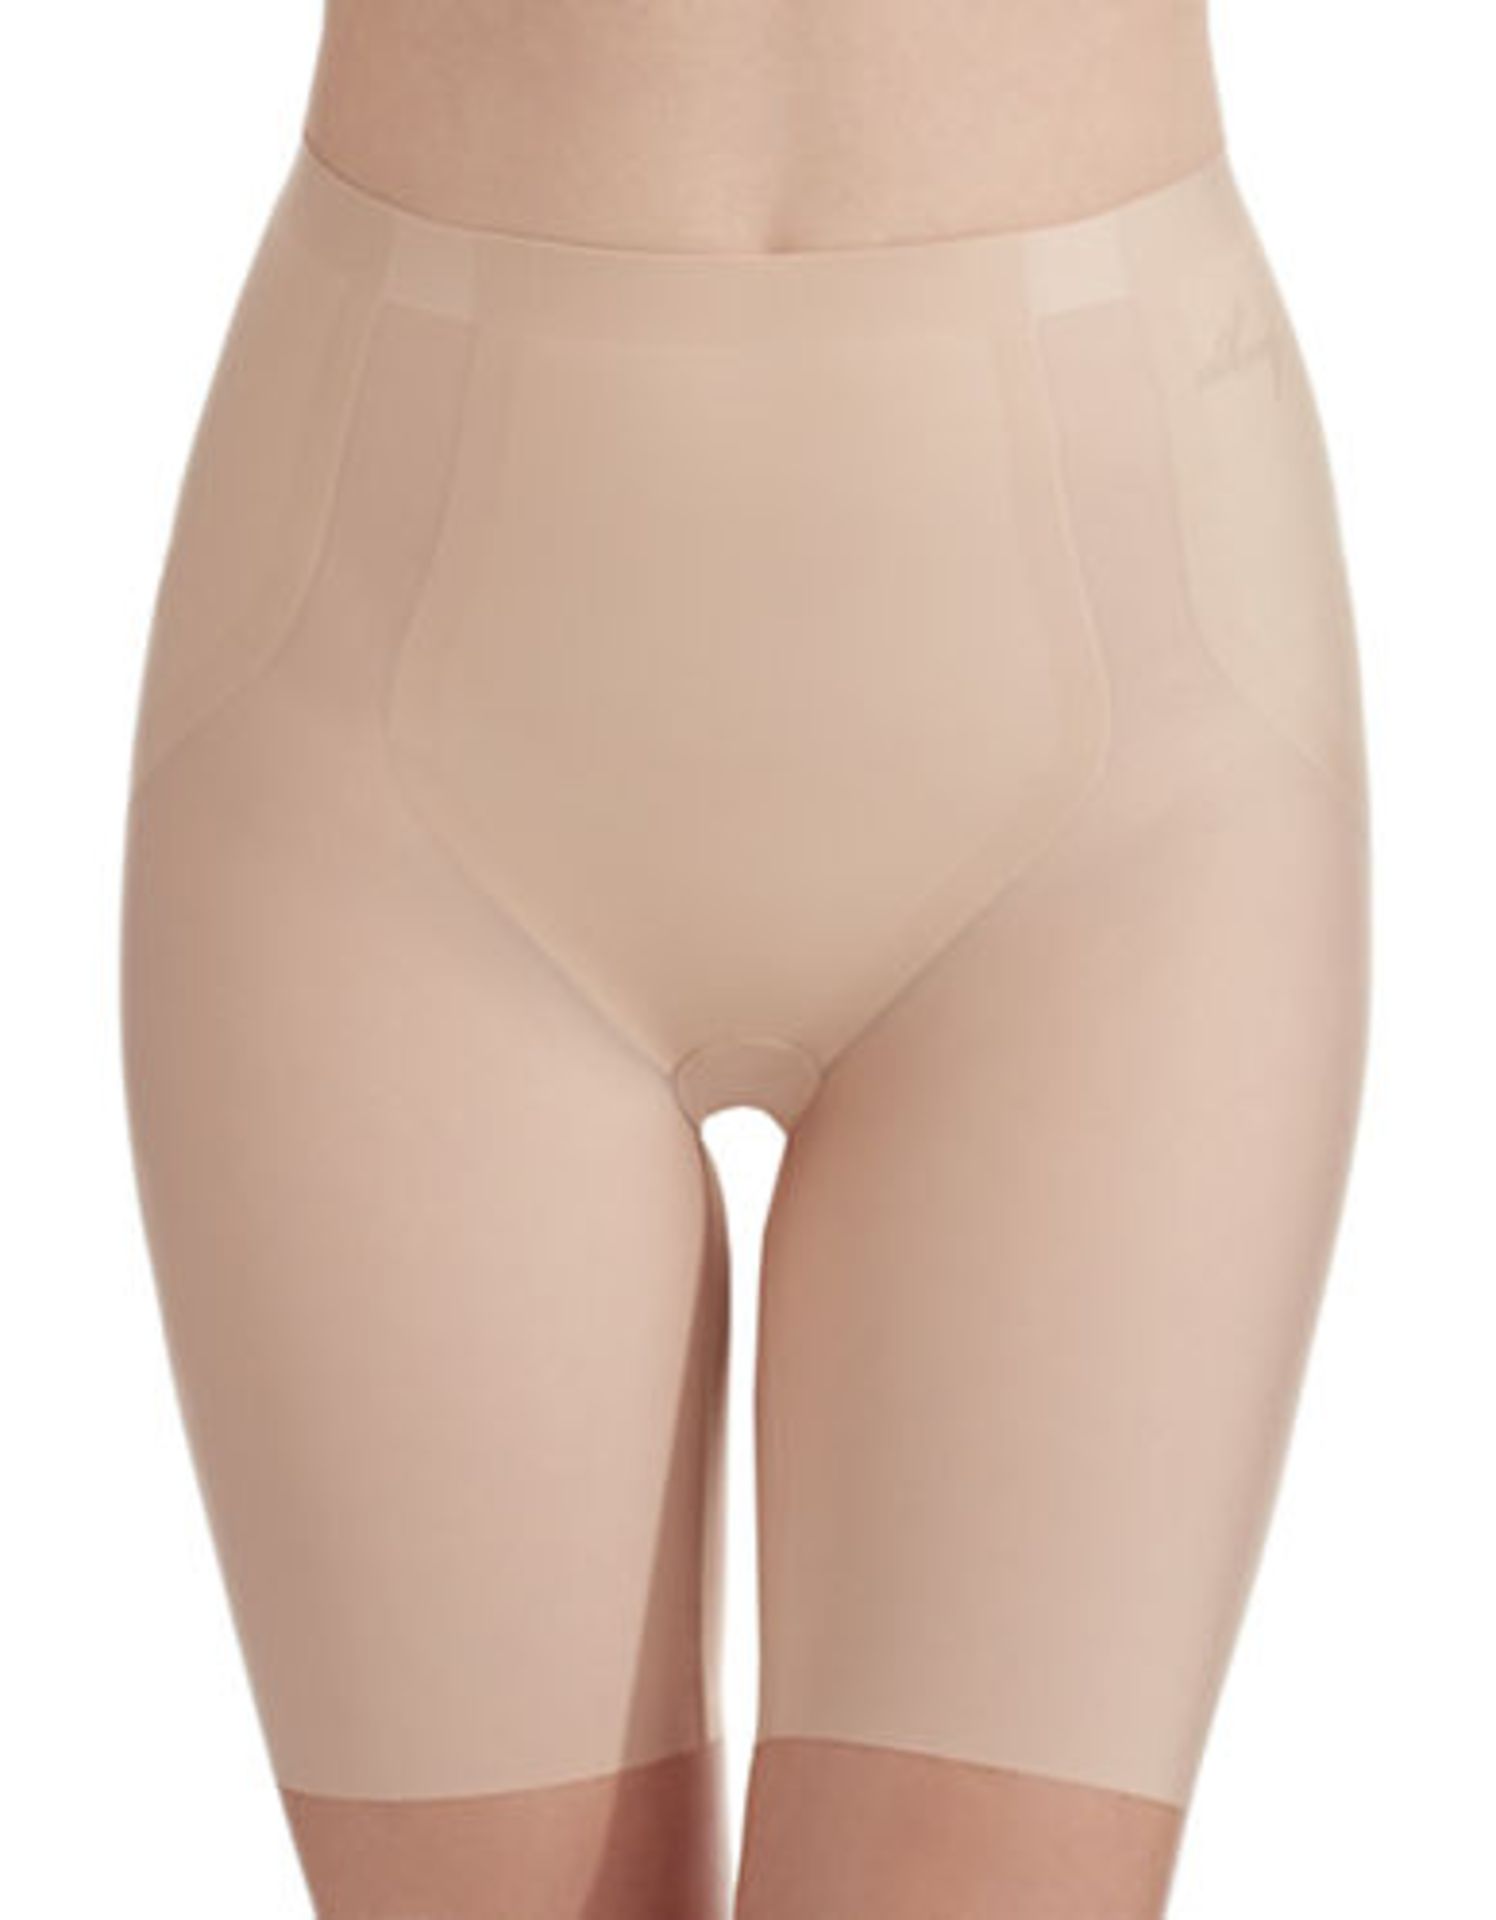 V Brand New A Lot Of Five DKNY Beige Thigh Slimmers Size M ISP £43.85 Each (Shopbop)